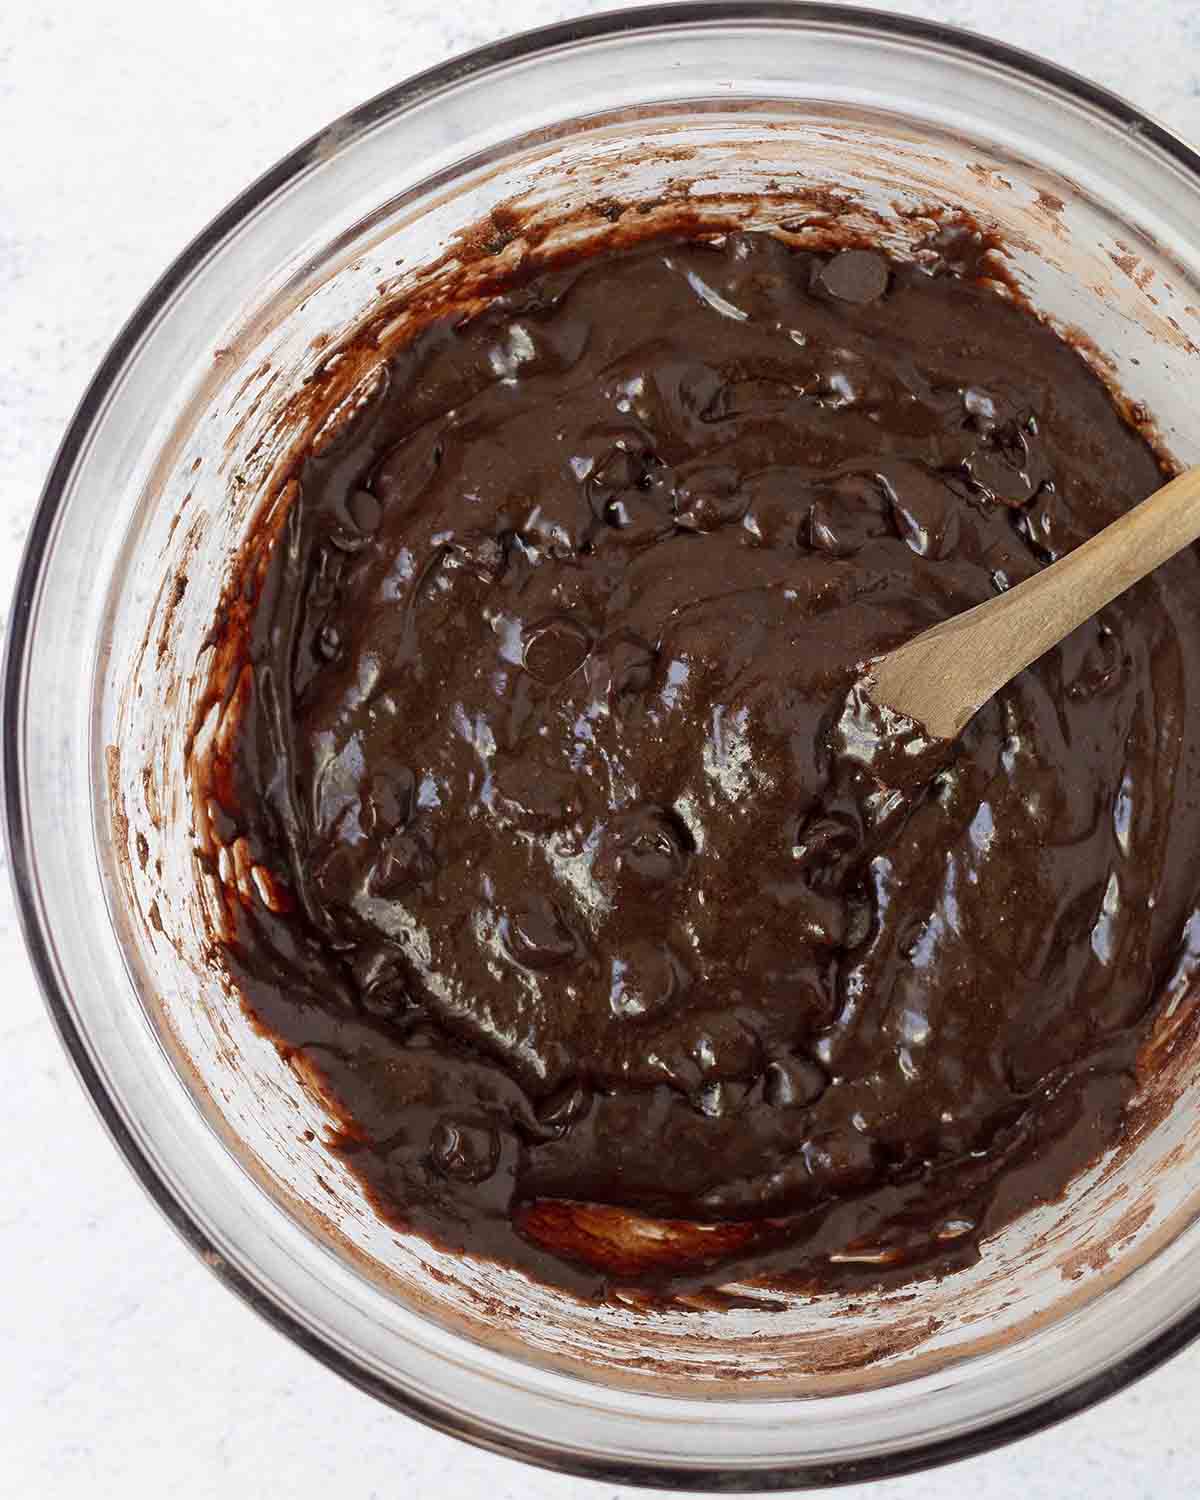 An overhead shot of a glass bowl filled with eggless brownie batter, there is a wooden spoon in the bowl.